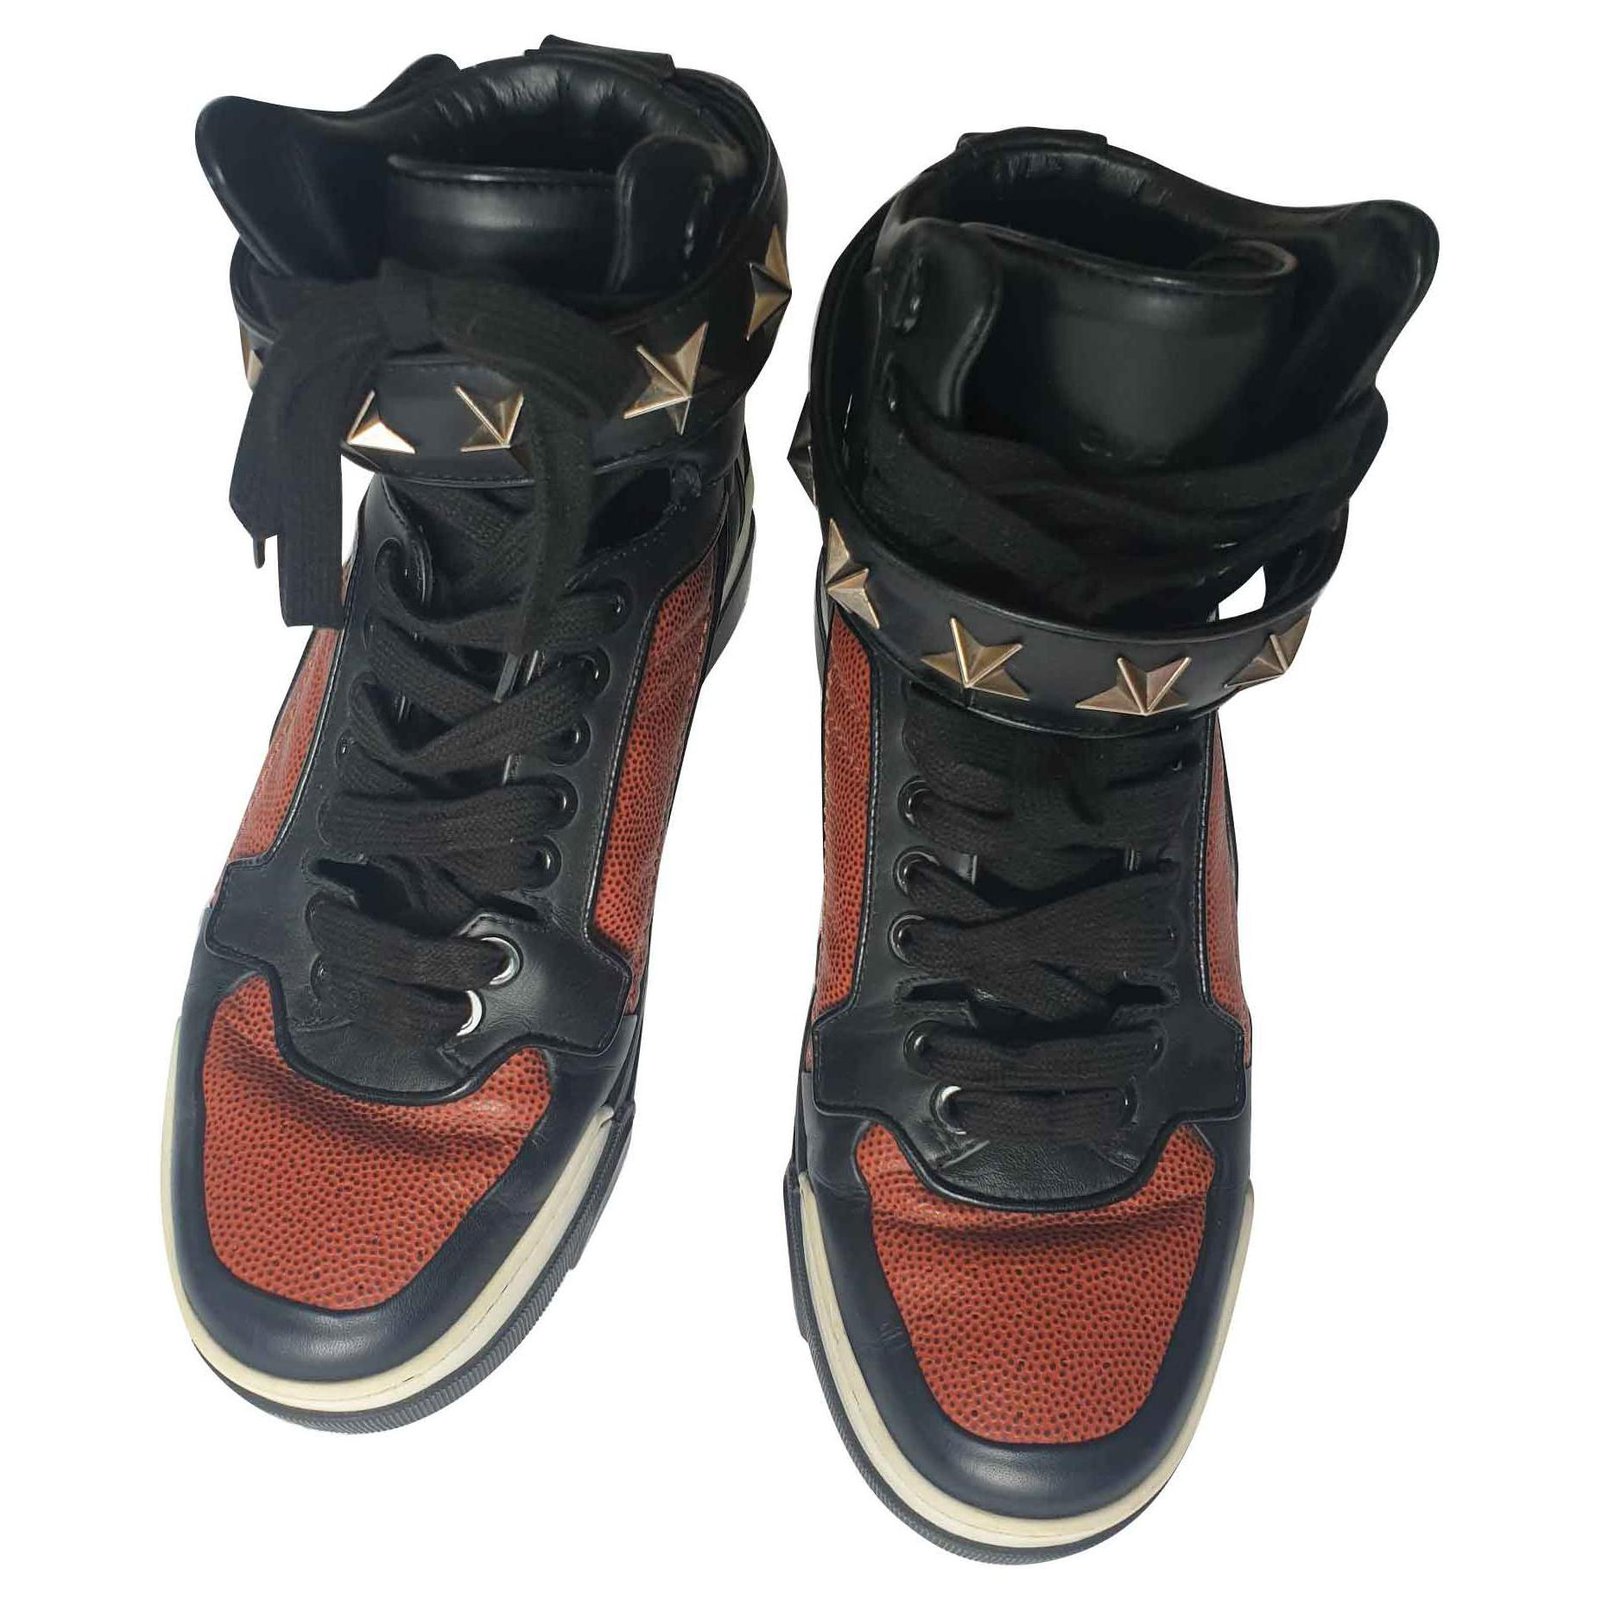 givenchy tyson high top sneakers